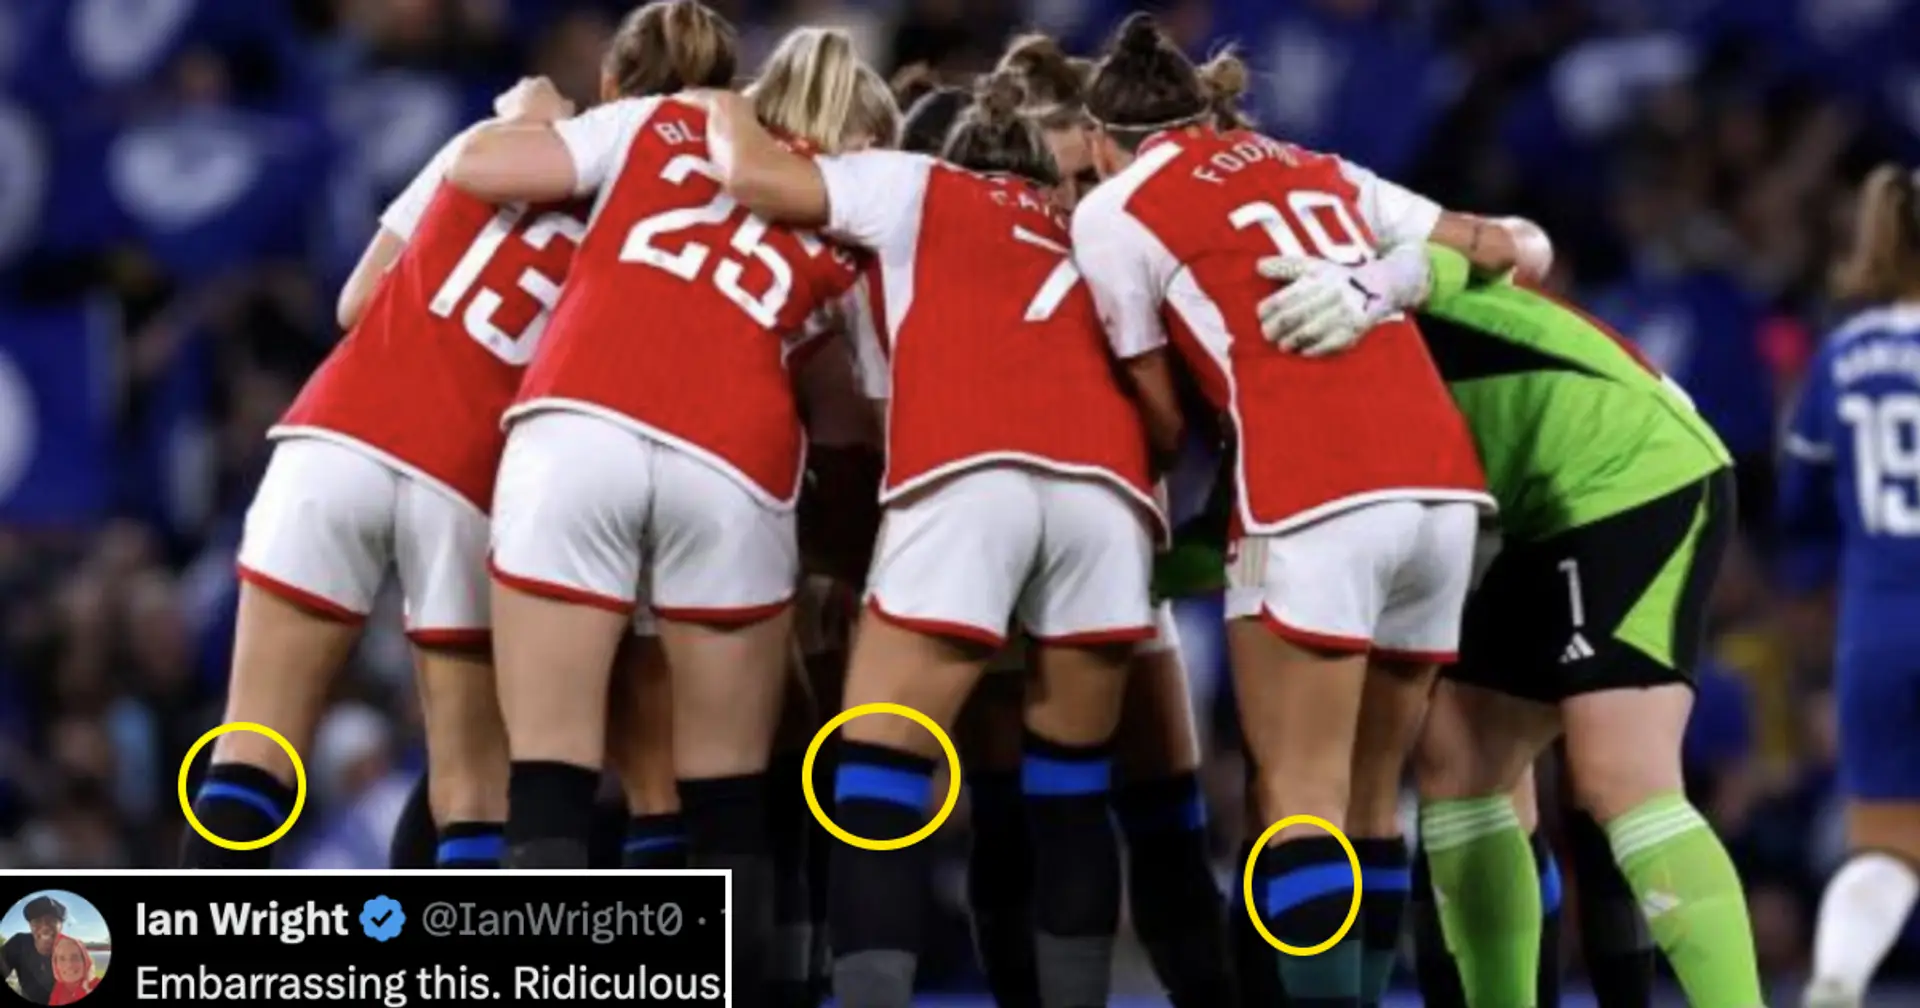 Arsenal had to wear Chelsea socks in latest WSL game – what? Explained